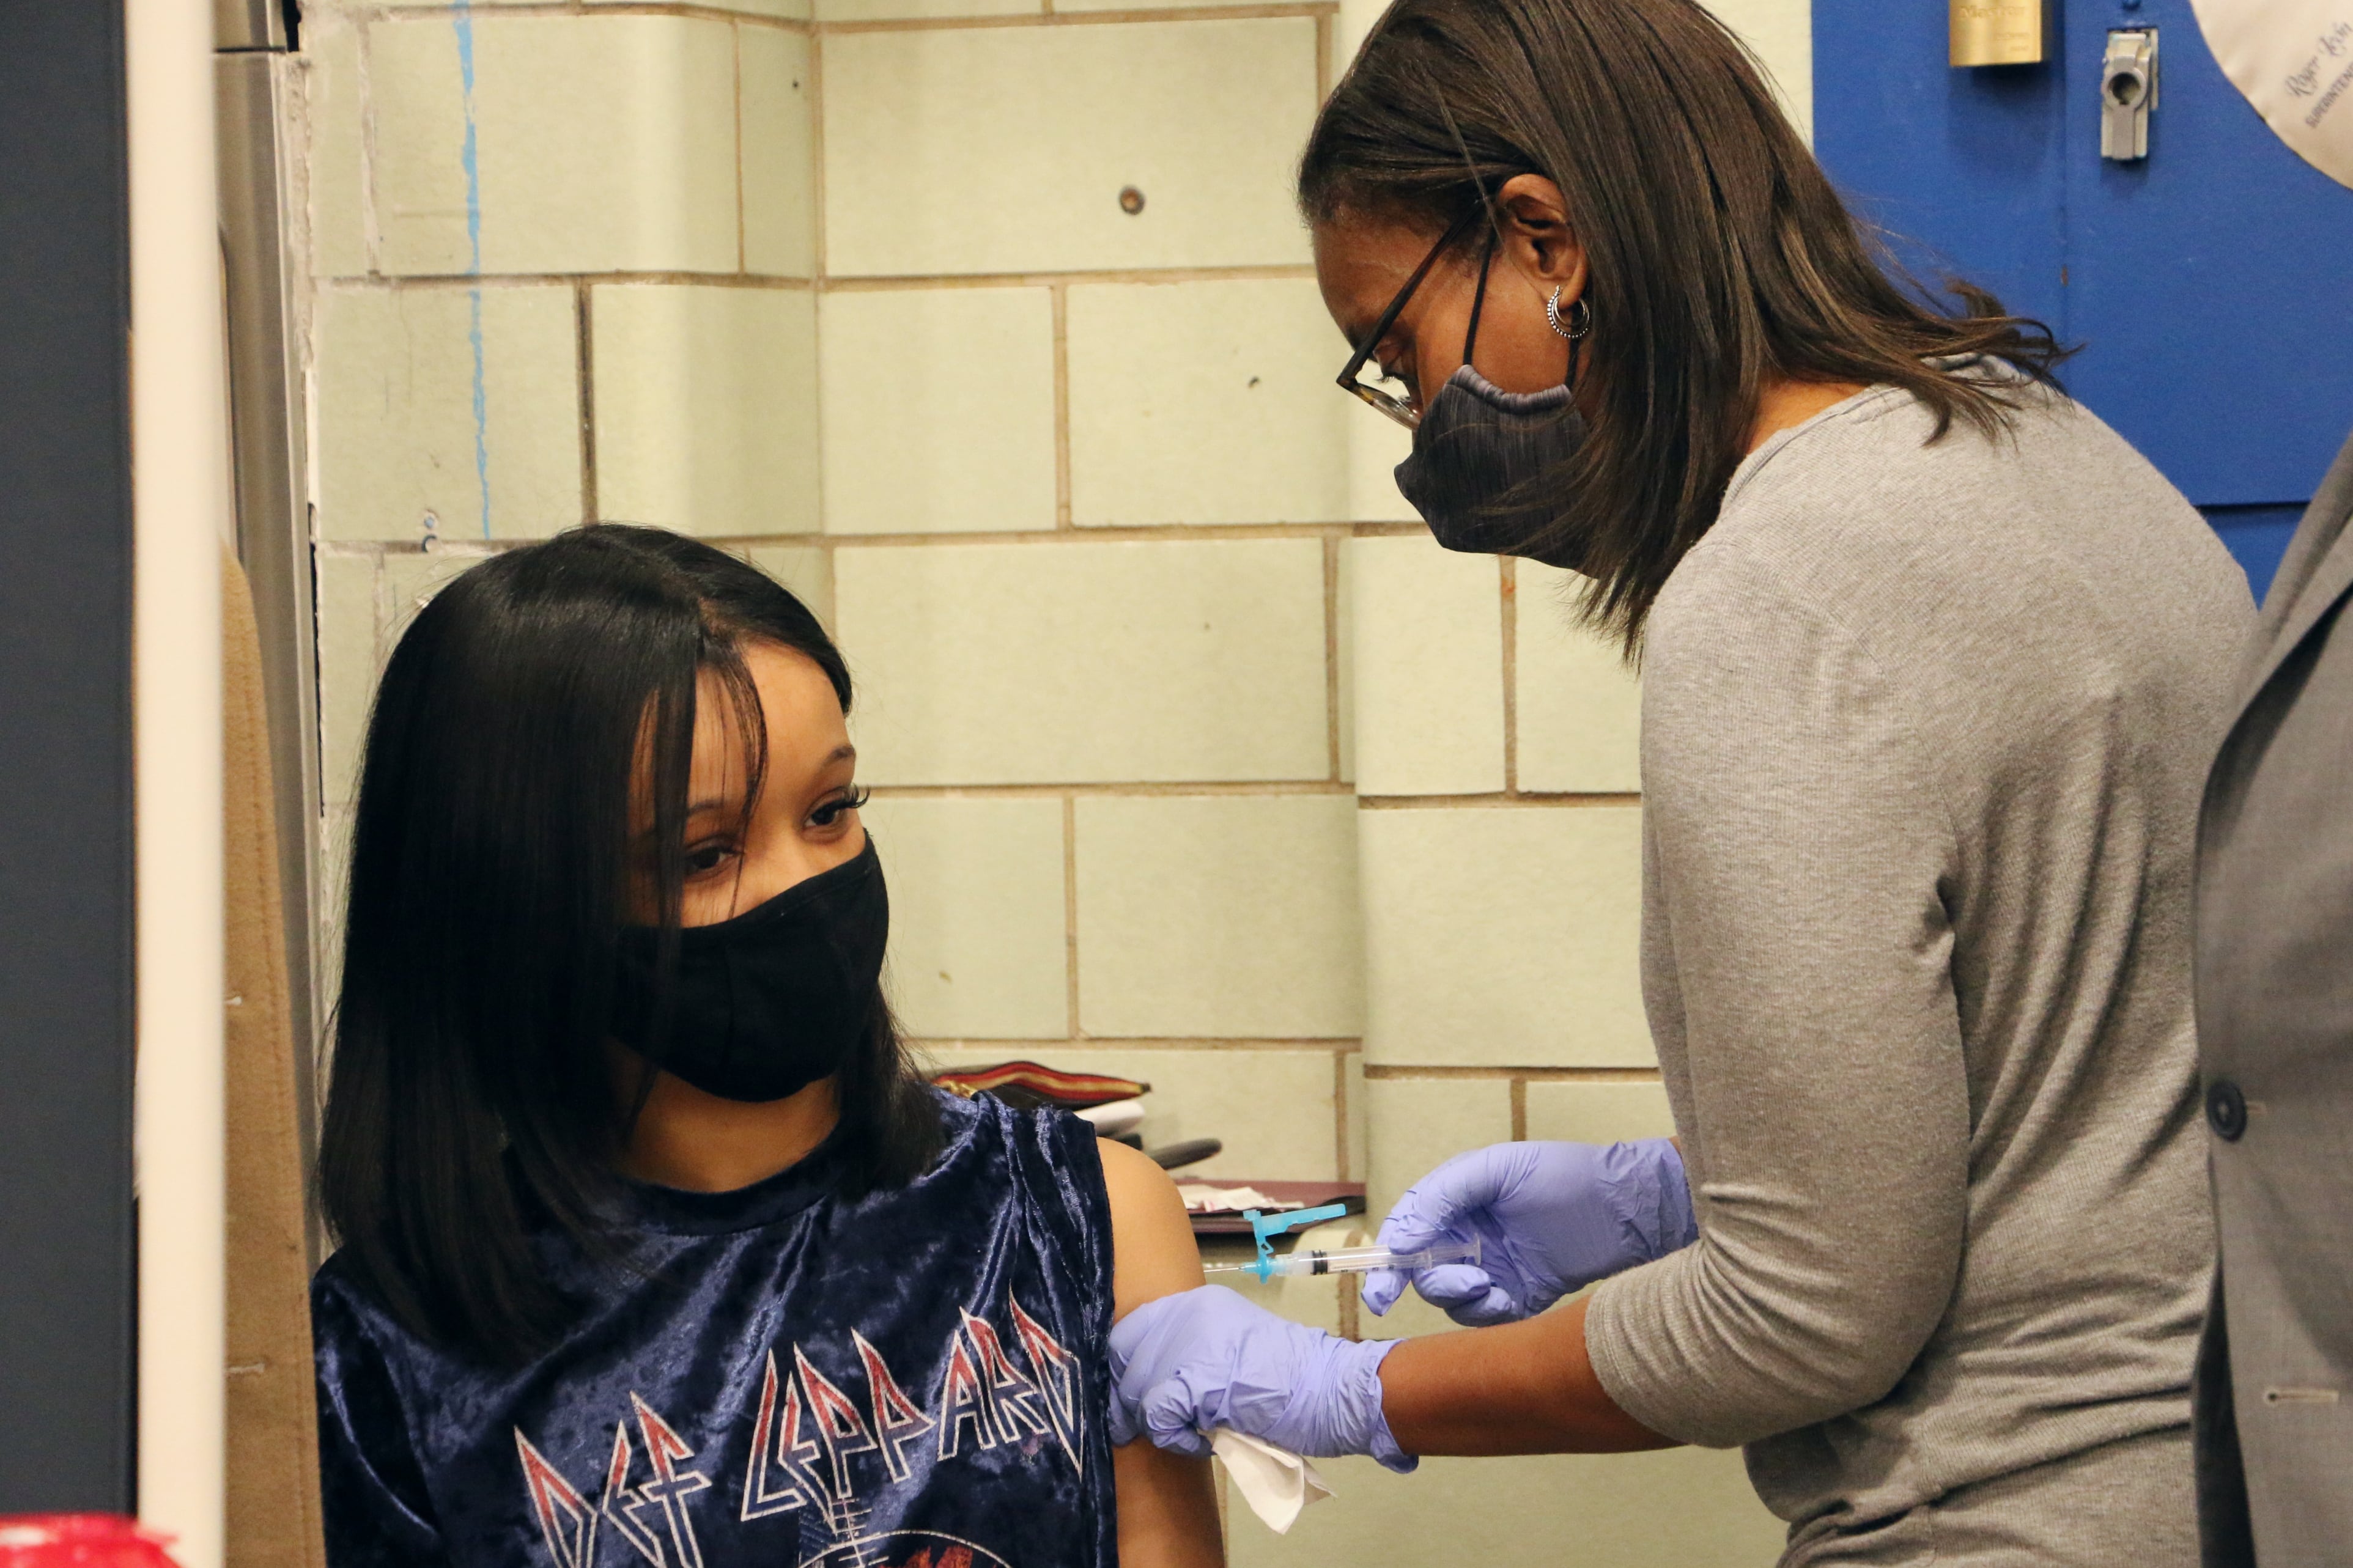 A young woman in a Def Leppard shirt receives a dose of a COVID vaccine.